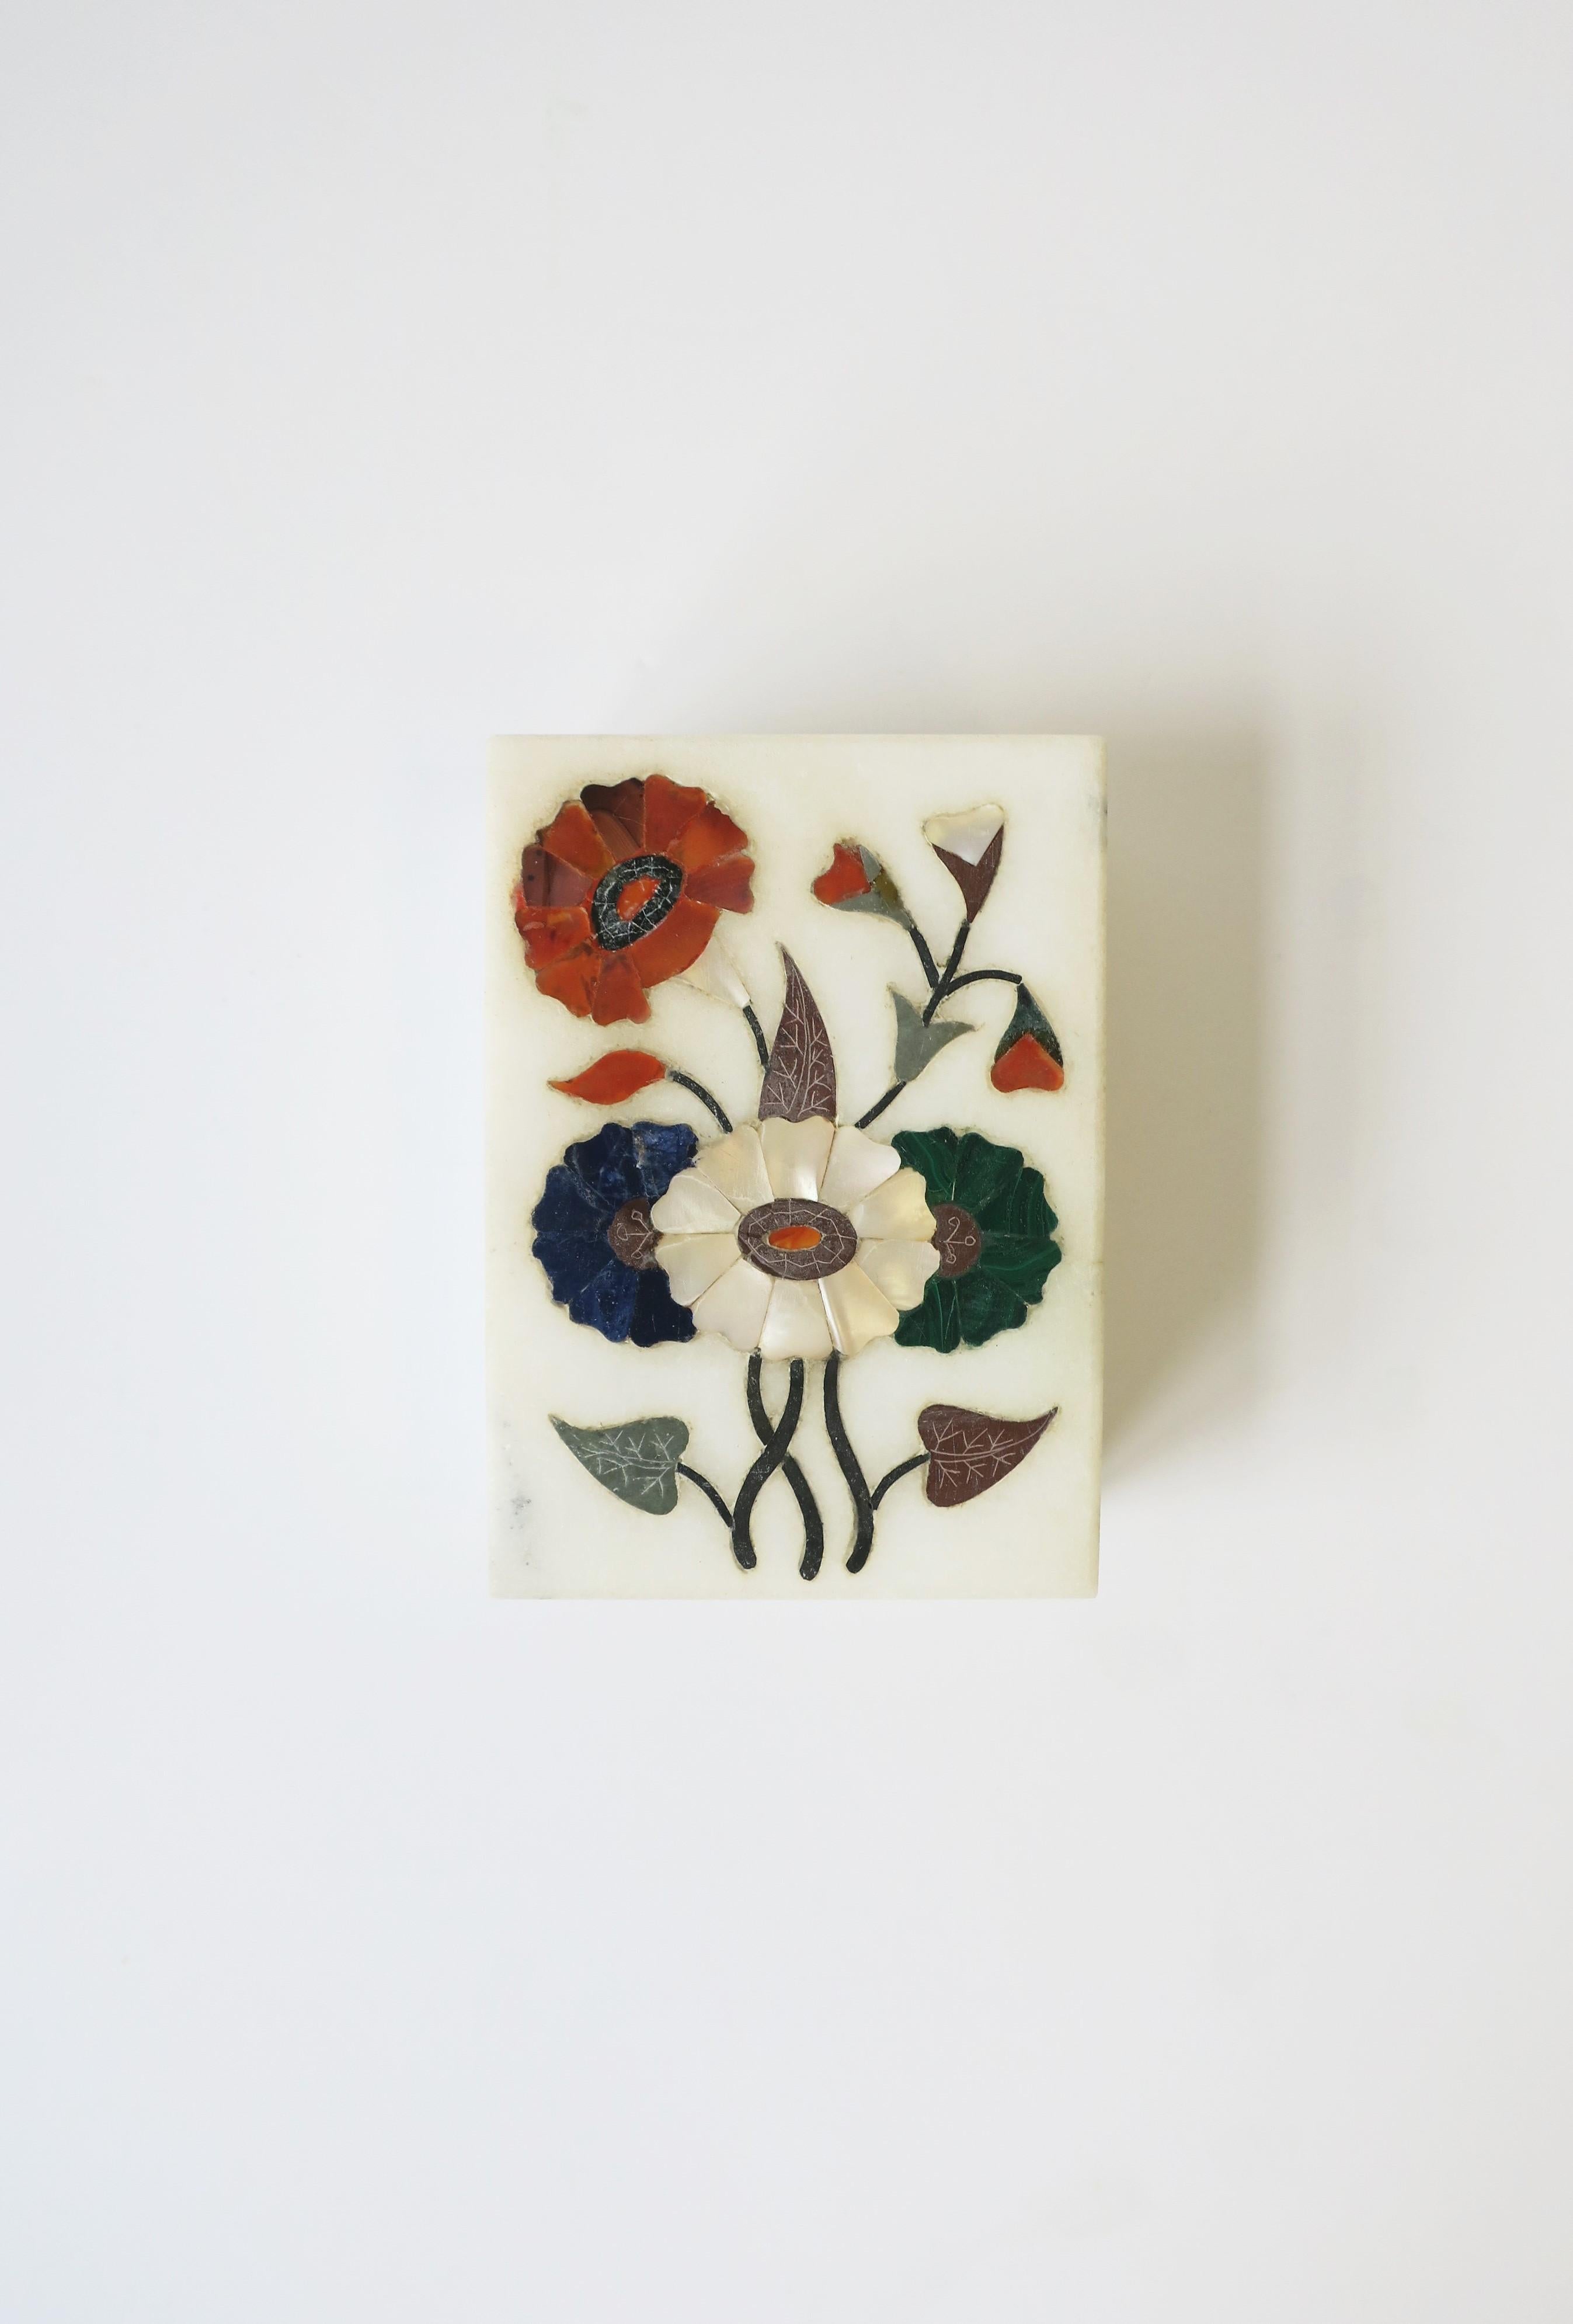 A beautiful multi semi-preciouses stone floral inlay or 'pietra dura' design box, circa 20th century. Box cover includes red carnelian, blue lapis, green malachite, white mother of pearl and other stones. Box itself is made from white granite